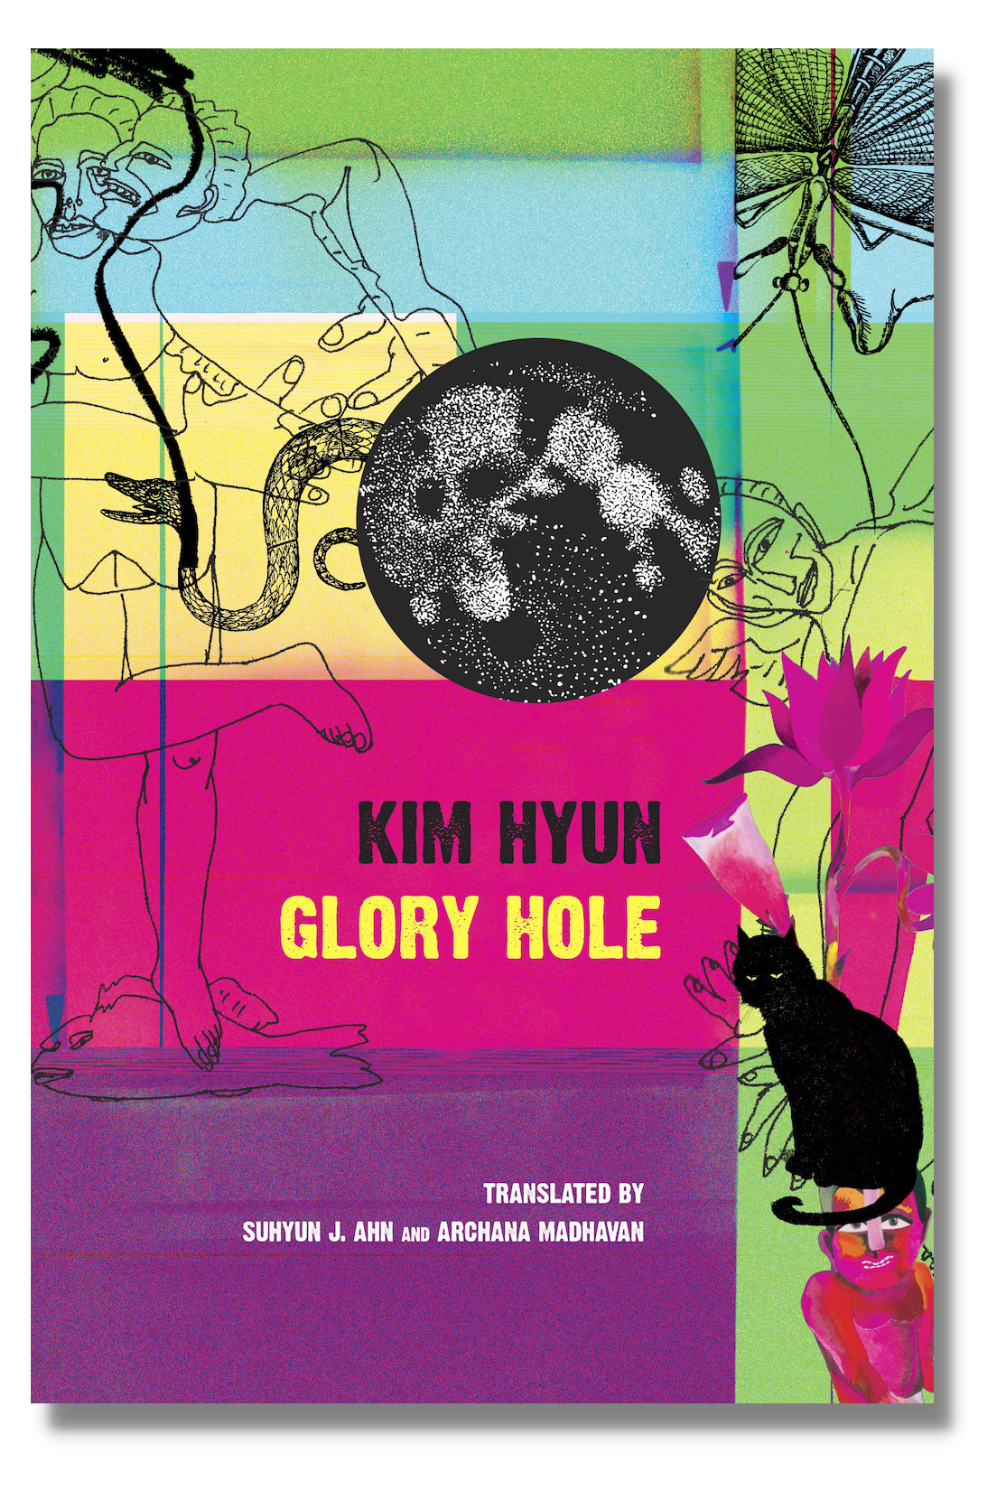 The cover of "Glory Hole"